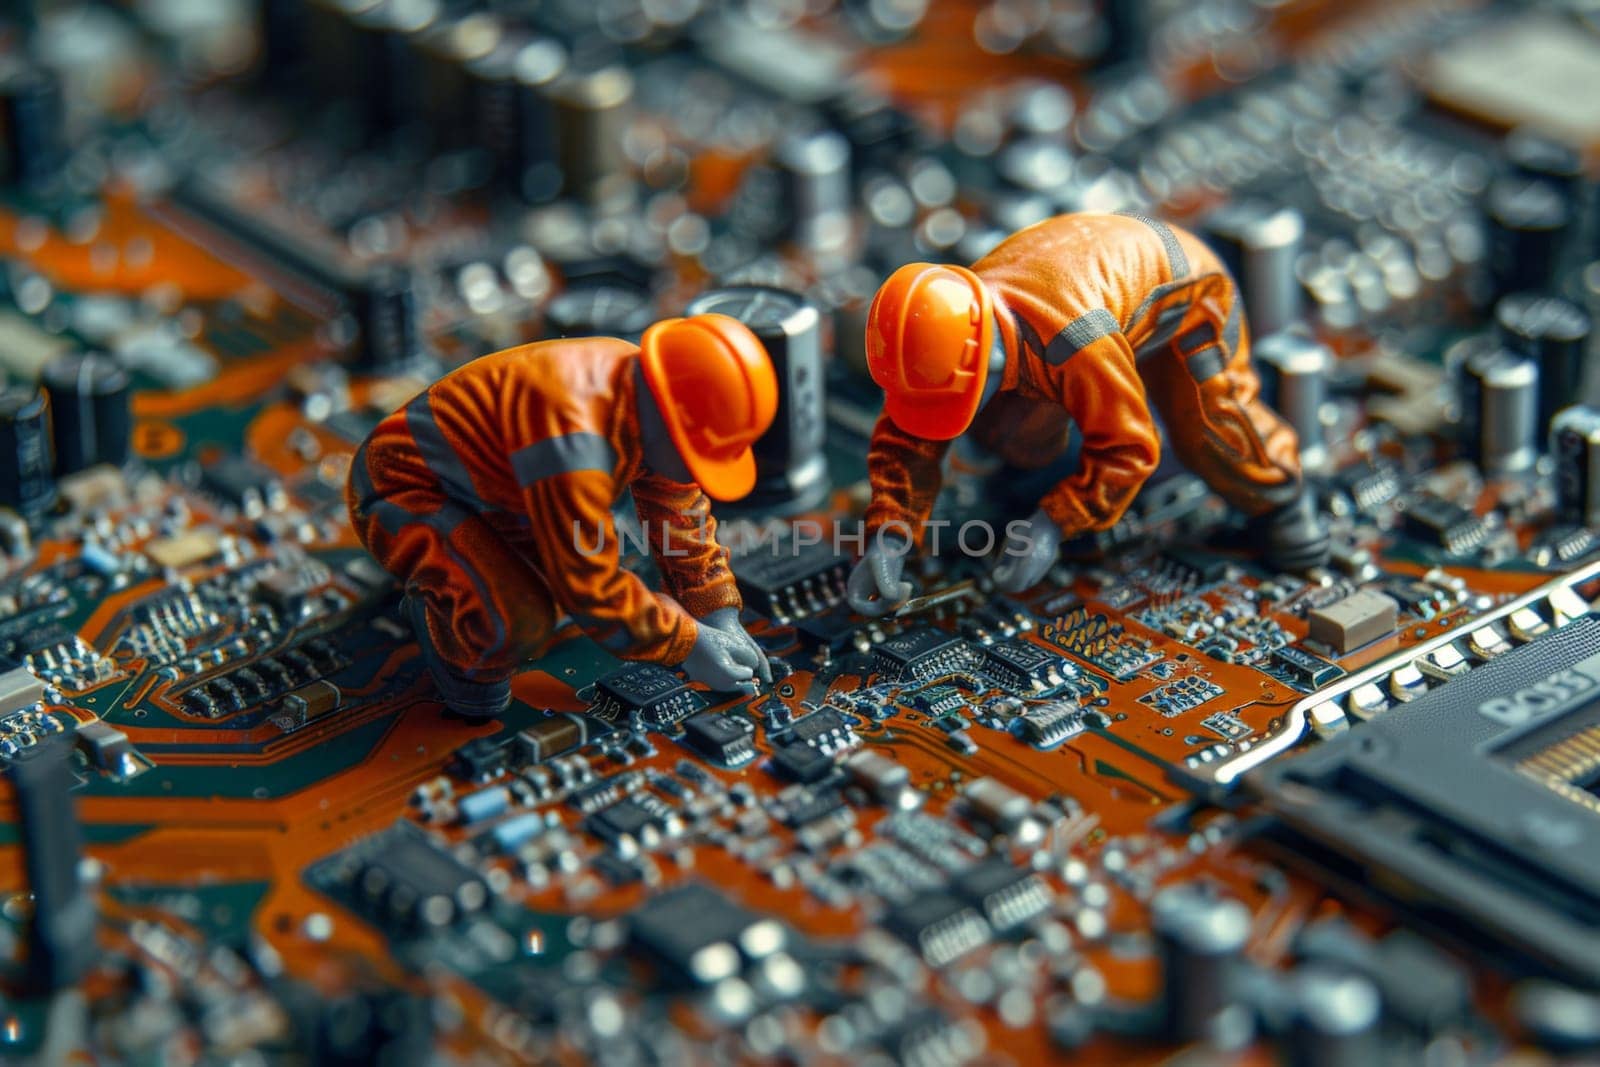 Miniature model, Miniature engineer cleaners working together on a circuit board, Computer repair by nijieimu